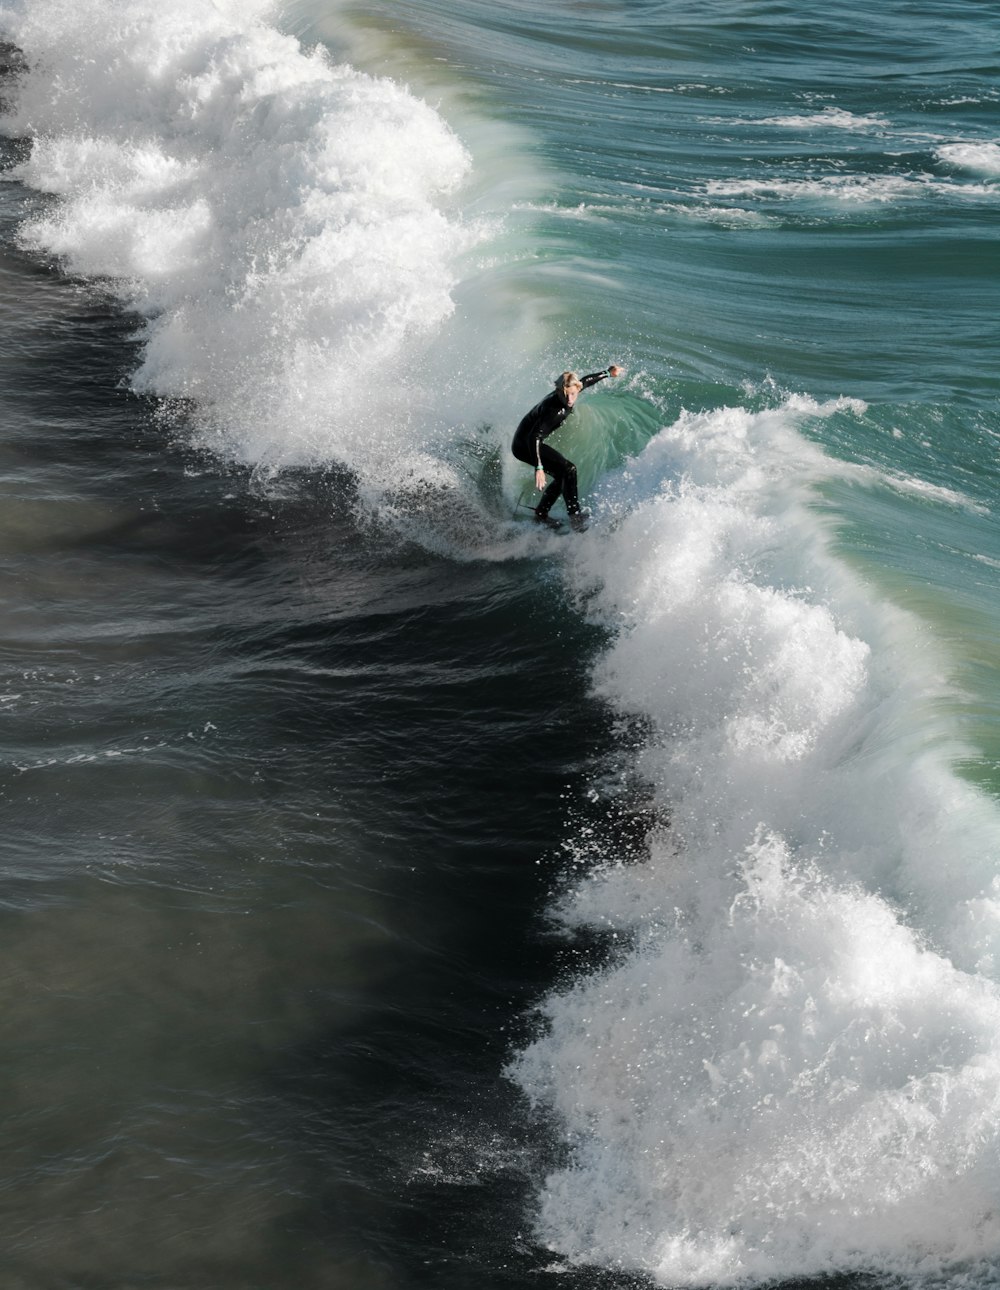 person surfing on sea waves at daytime